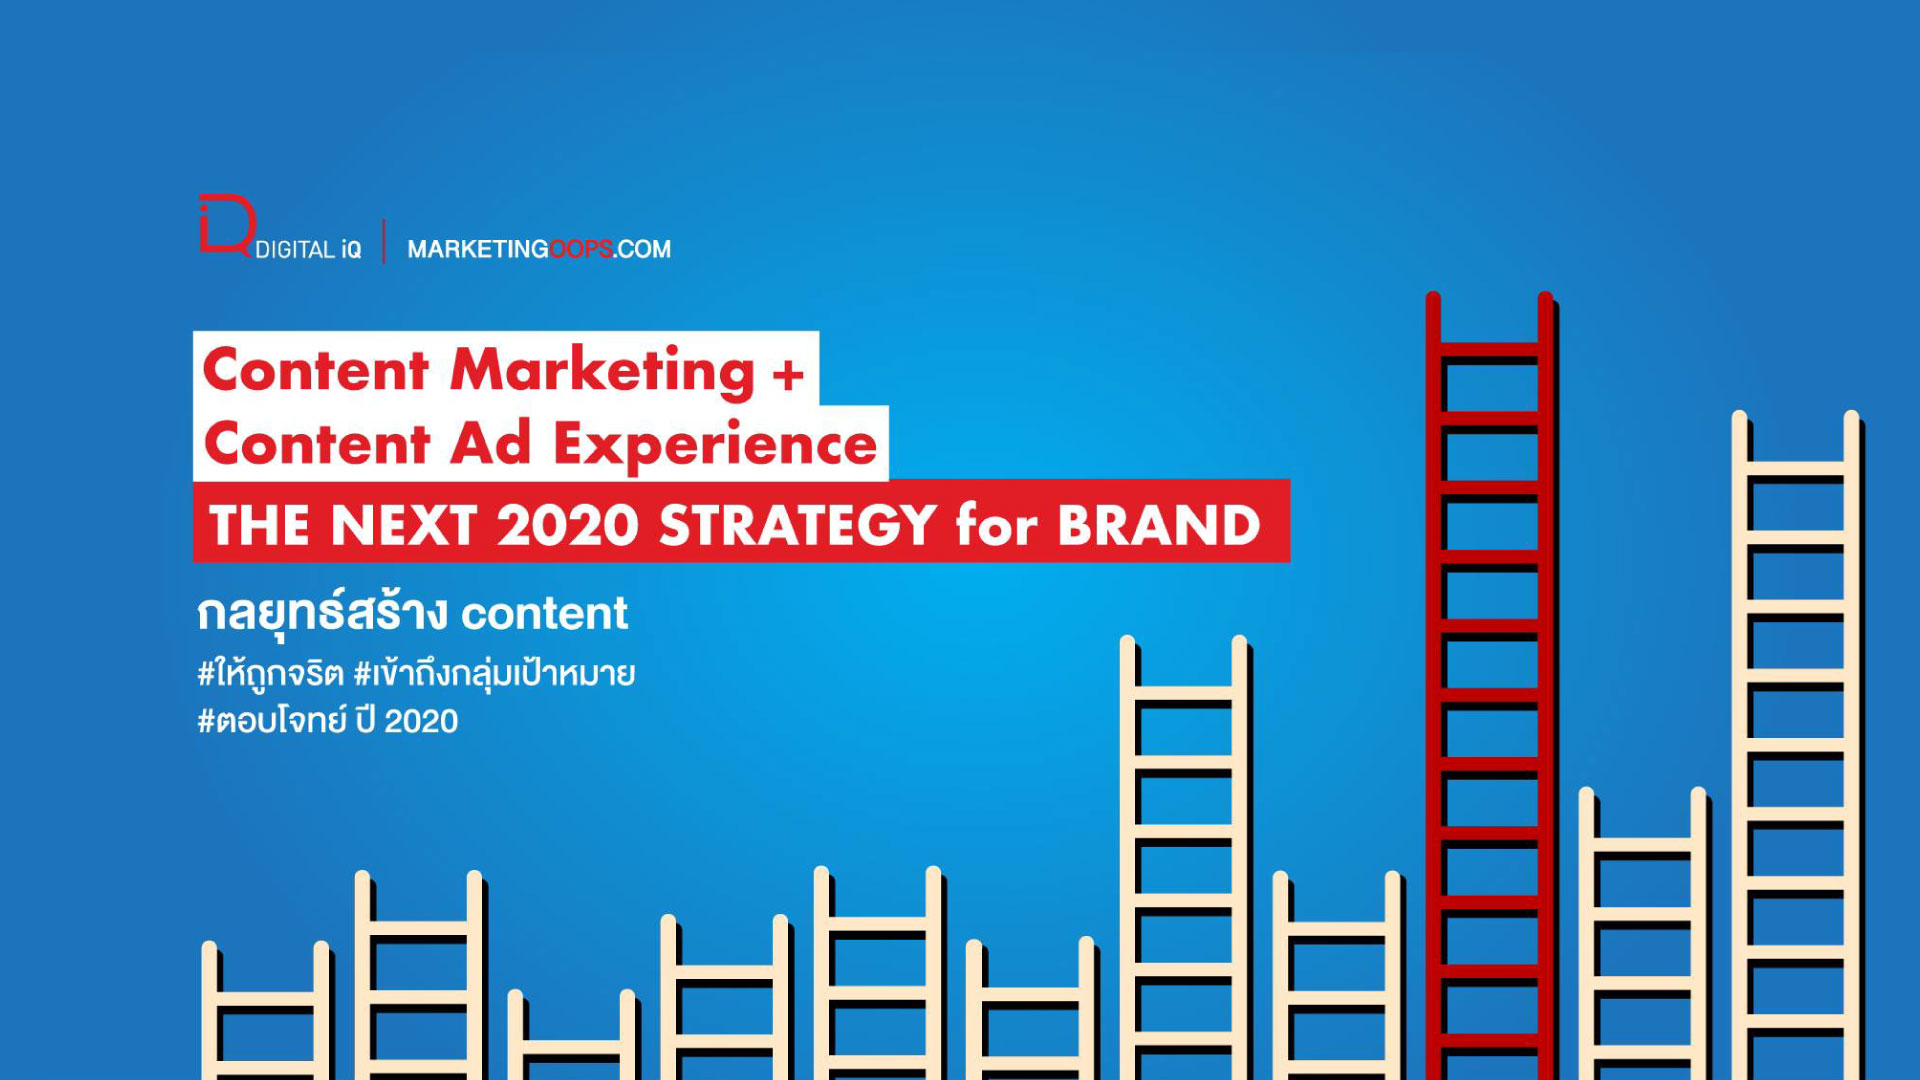 Content Marketing + Ad Experience - The Next Strategy for Brand